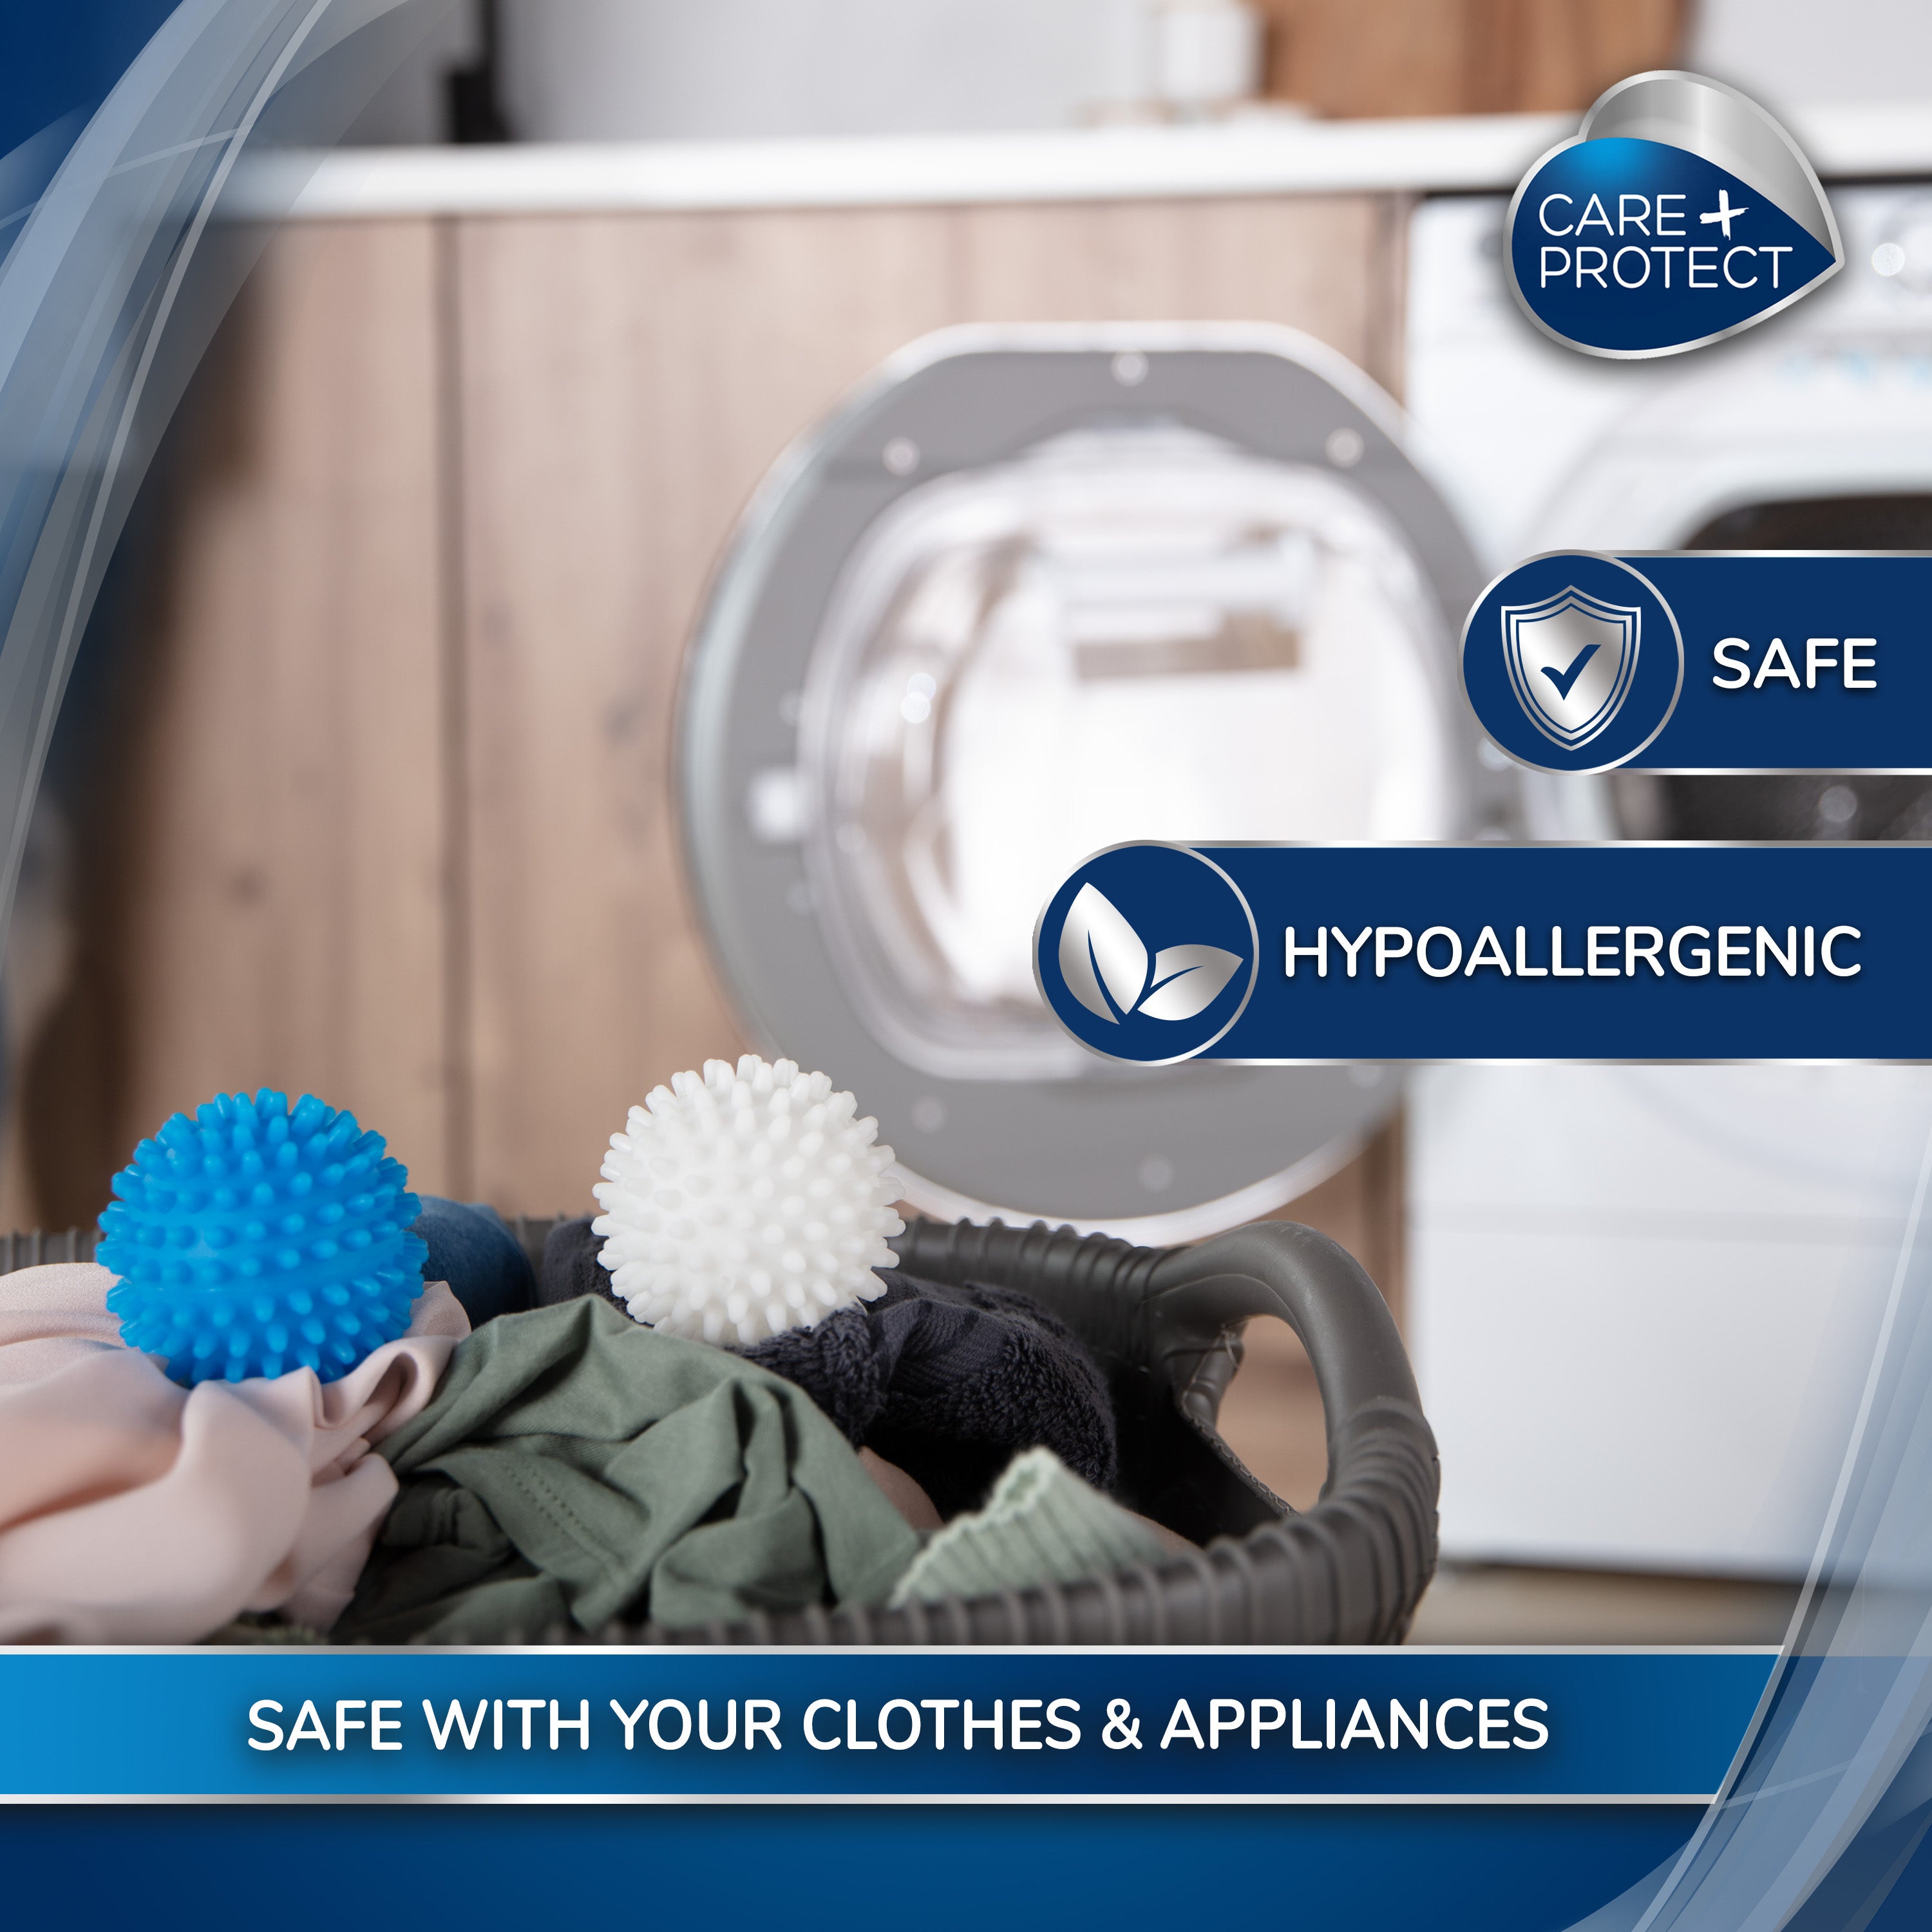 Haier Washing Machine and Tumble Dryer Stacking Kit + Care+Protect Universal Dryer Ball